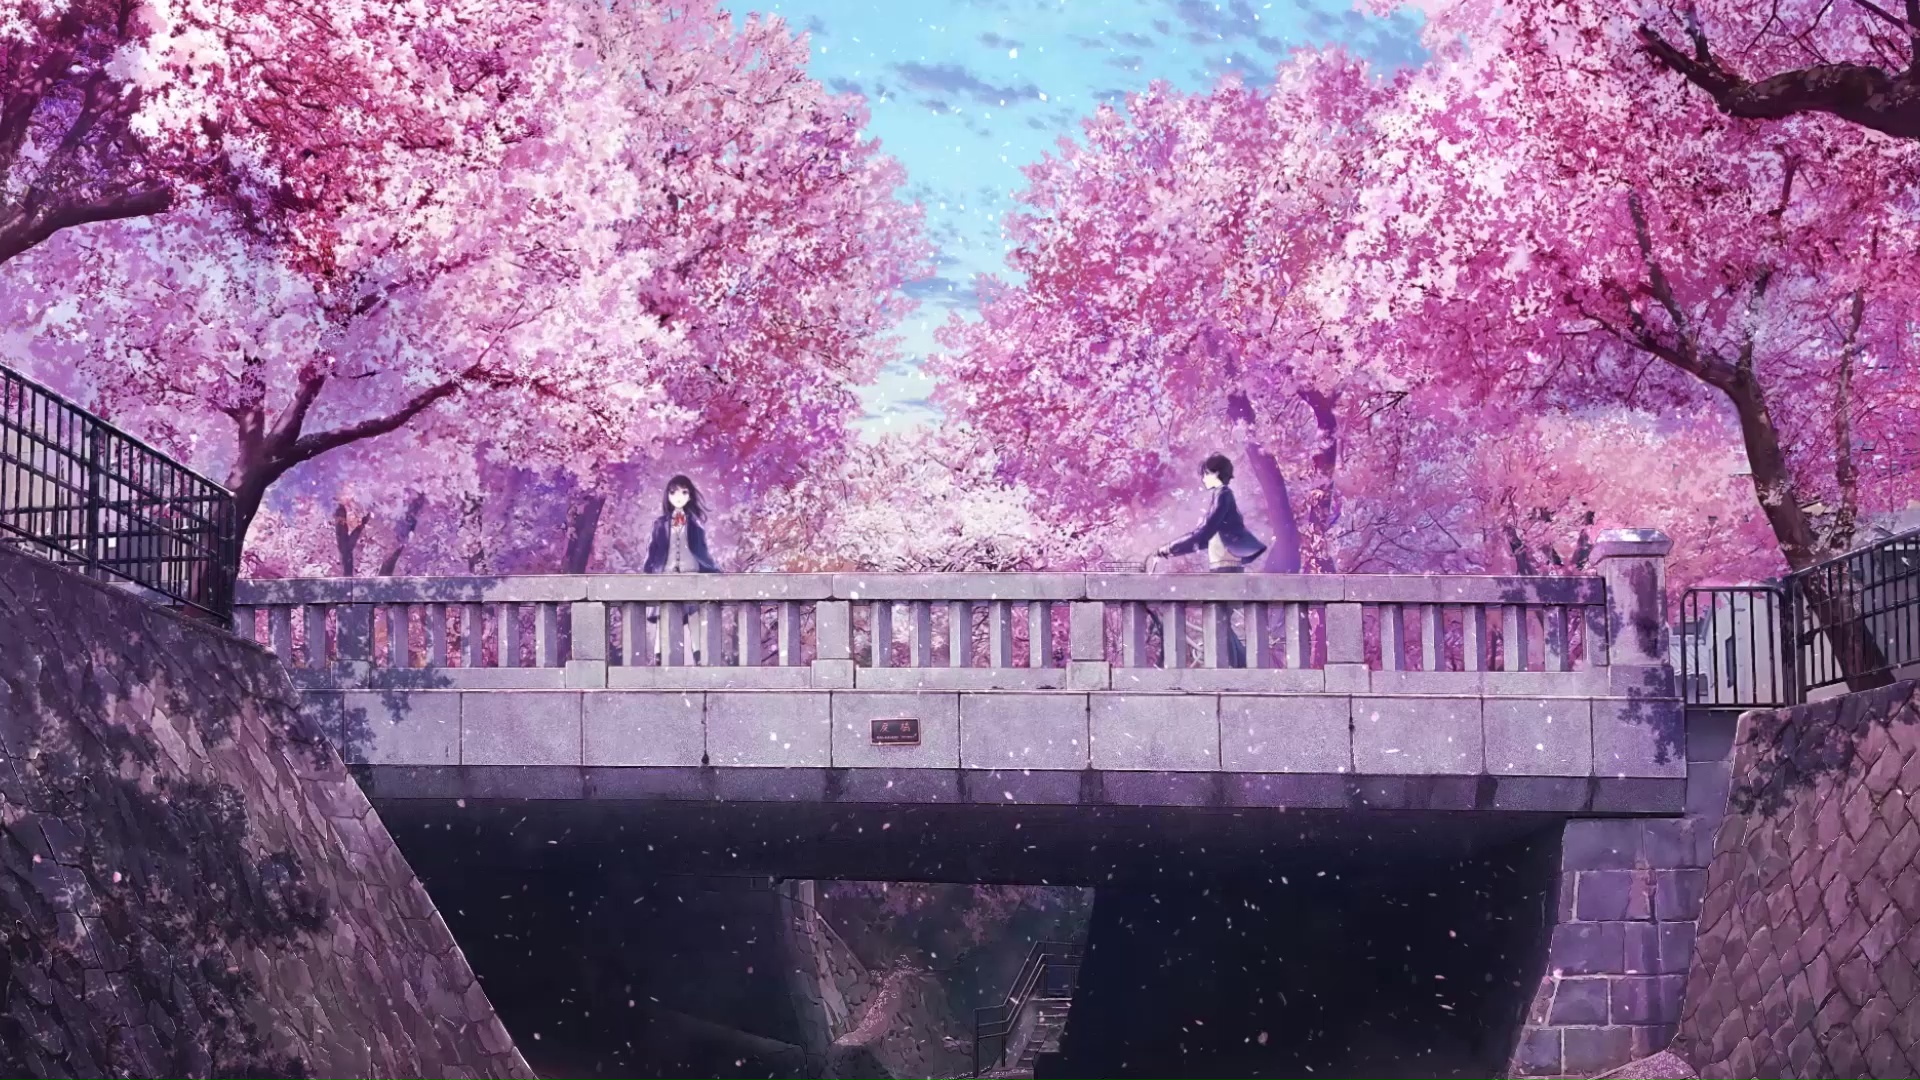 Anime Couple On Bridge With Cherry Blossom Live Wallpaper for your desktop ...